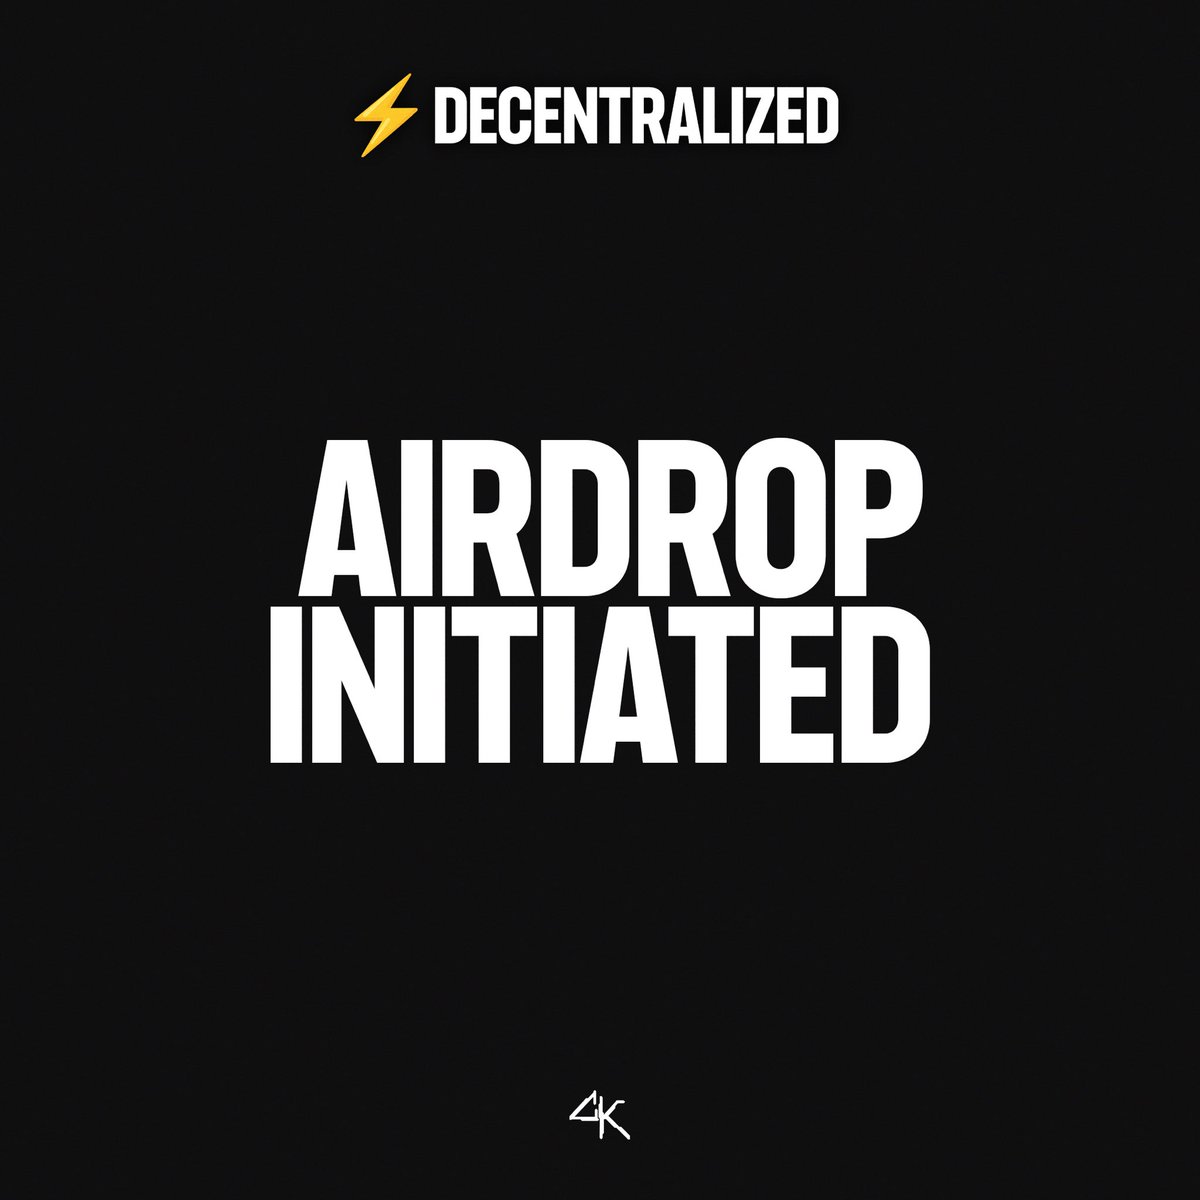 Airdrop initiated. The airdrop will take place in batches and we will confirm here once it’s completed. Are you ready for ⚡️DECENTRALIZED?